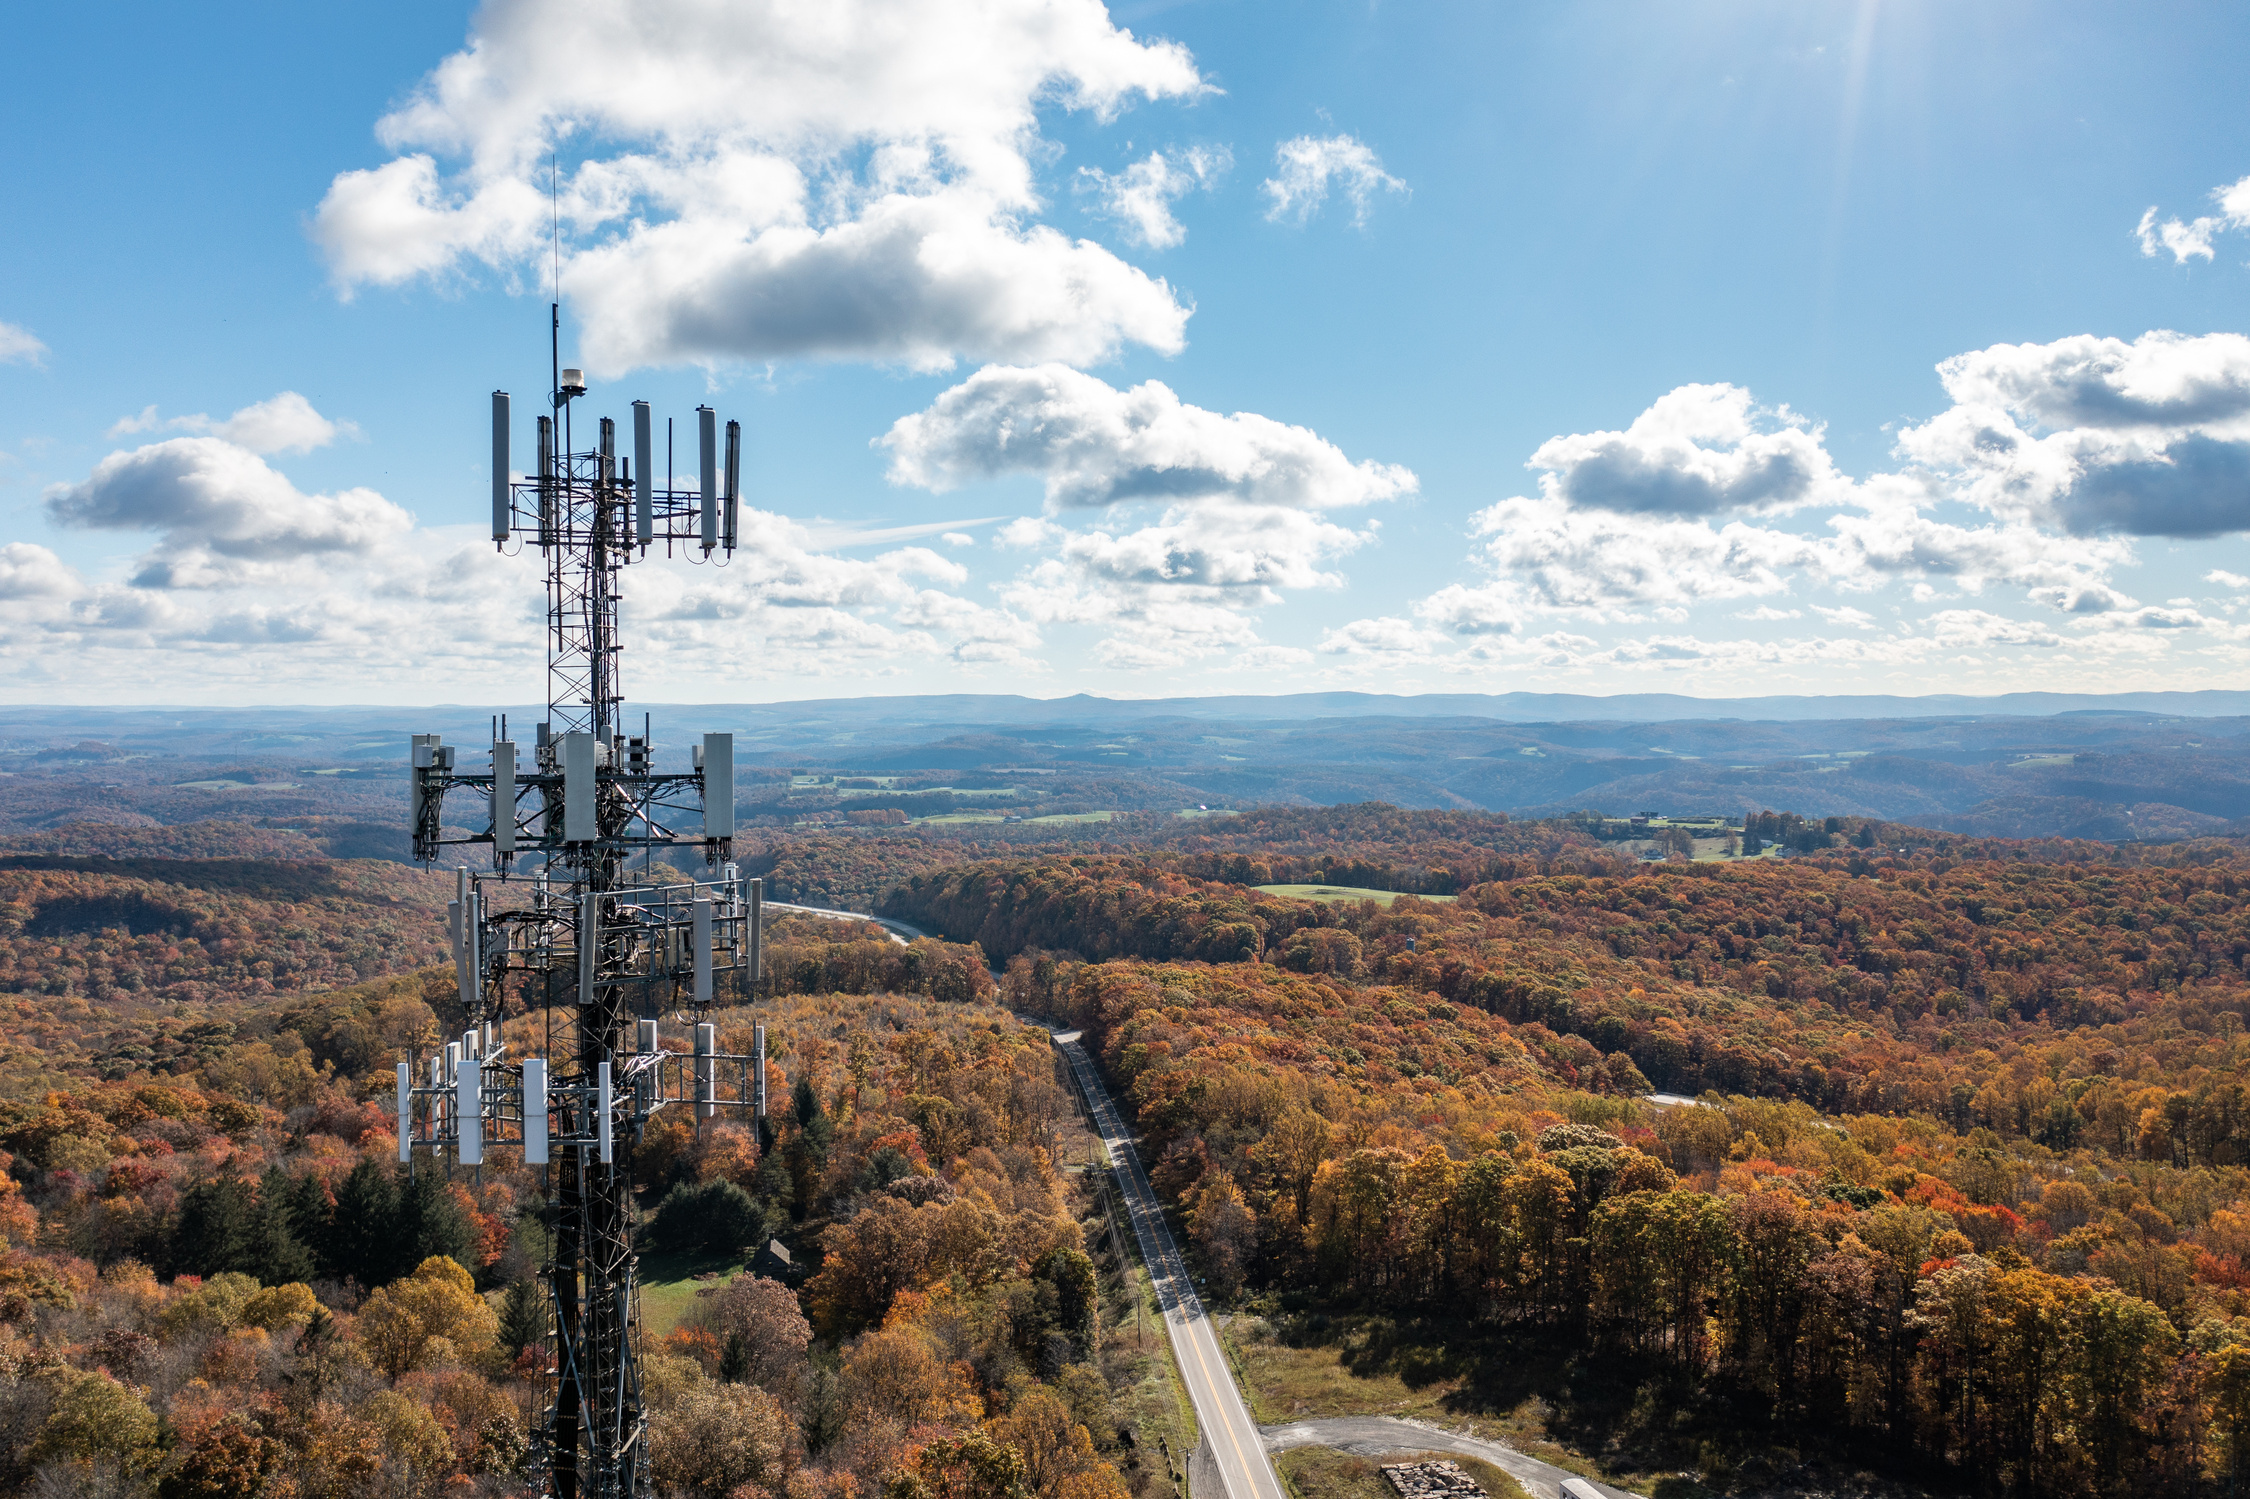 Cell Phone or Mobile Service Tower in Forested Area of West Virginia Providing Broadband Service